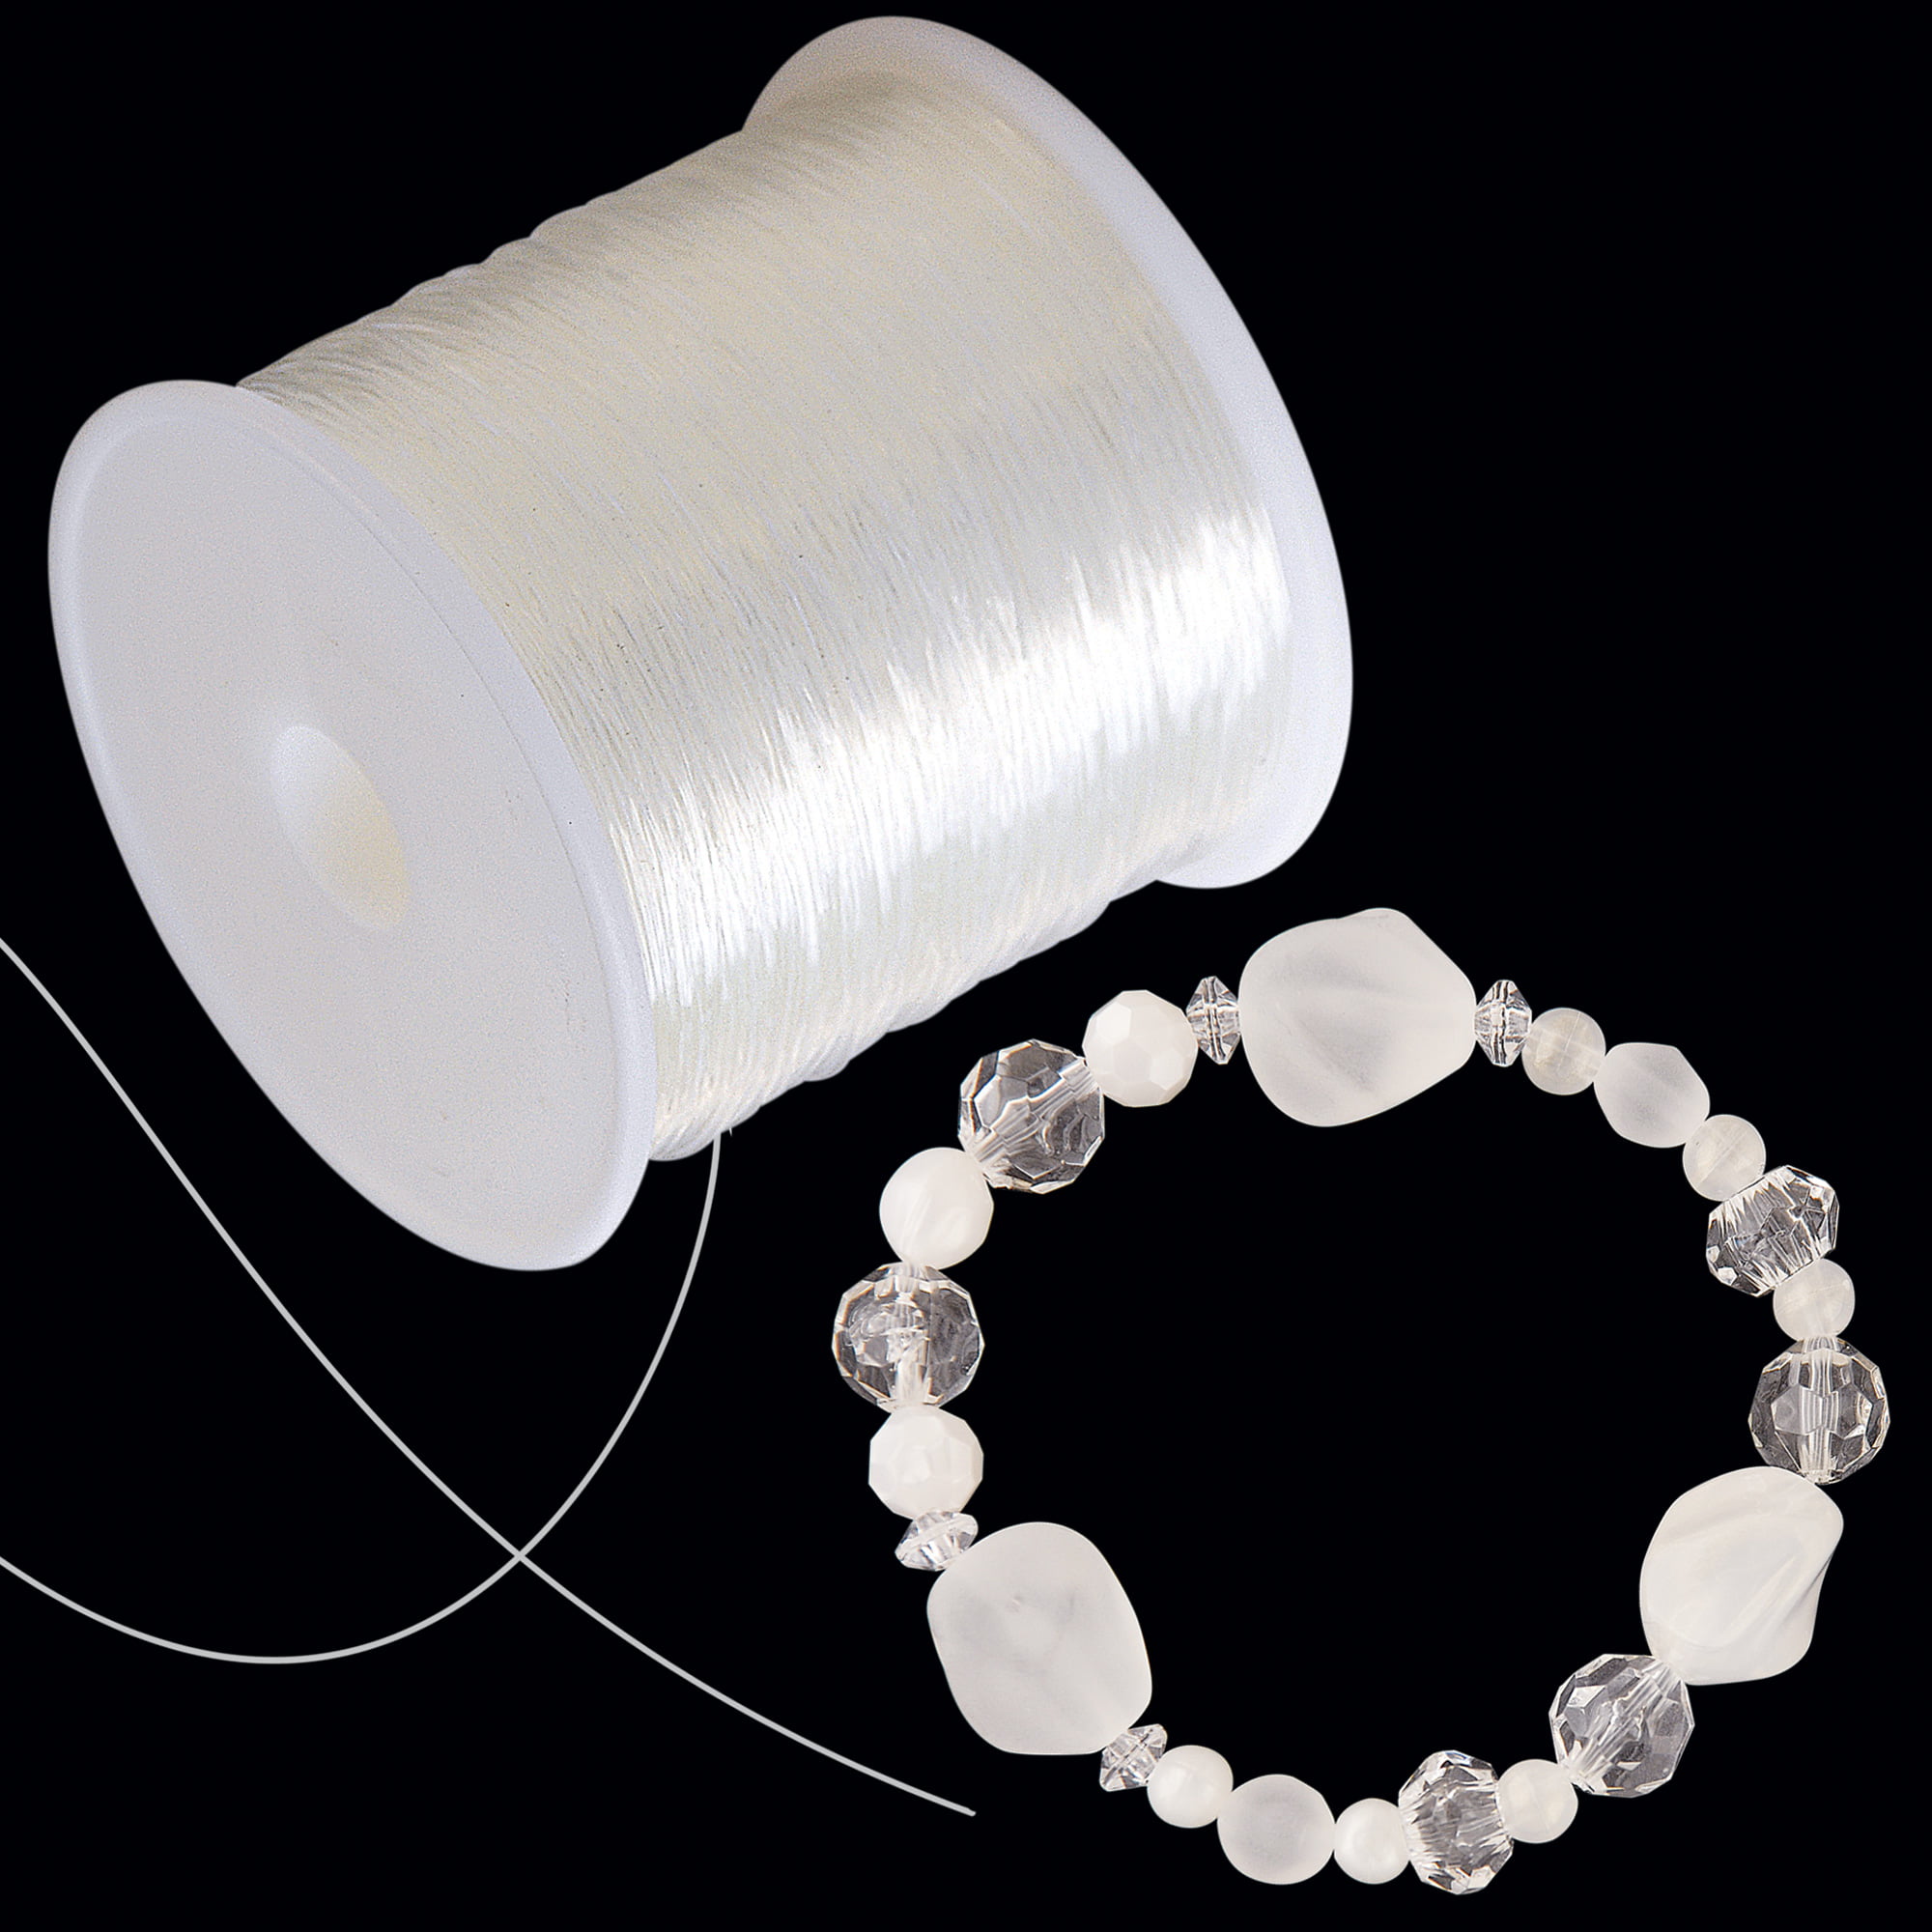 Wrap Elastic Cord For Beads: Strong & Stretchy Bracelet String By Glass  Bead Co. Easy To Use, Versatile Crafting Tool For Gifts & Jewelry Making  From Kumakuma, $31.65